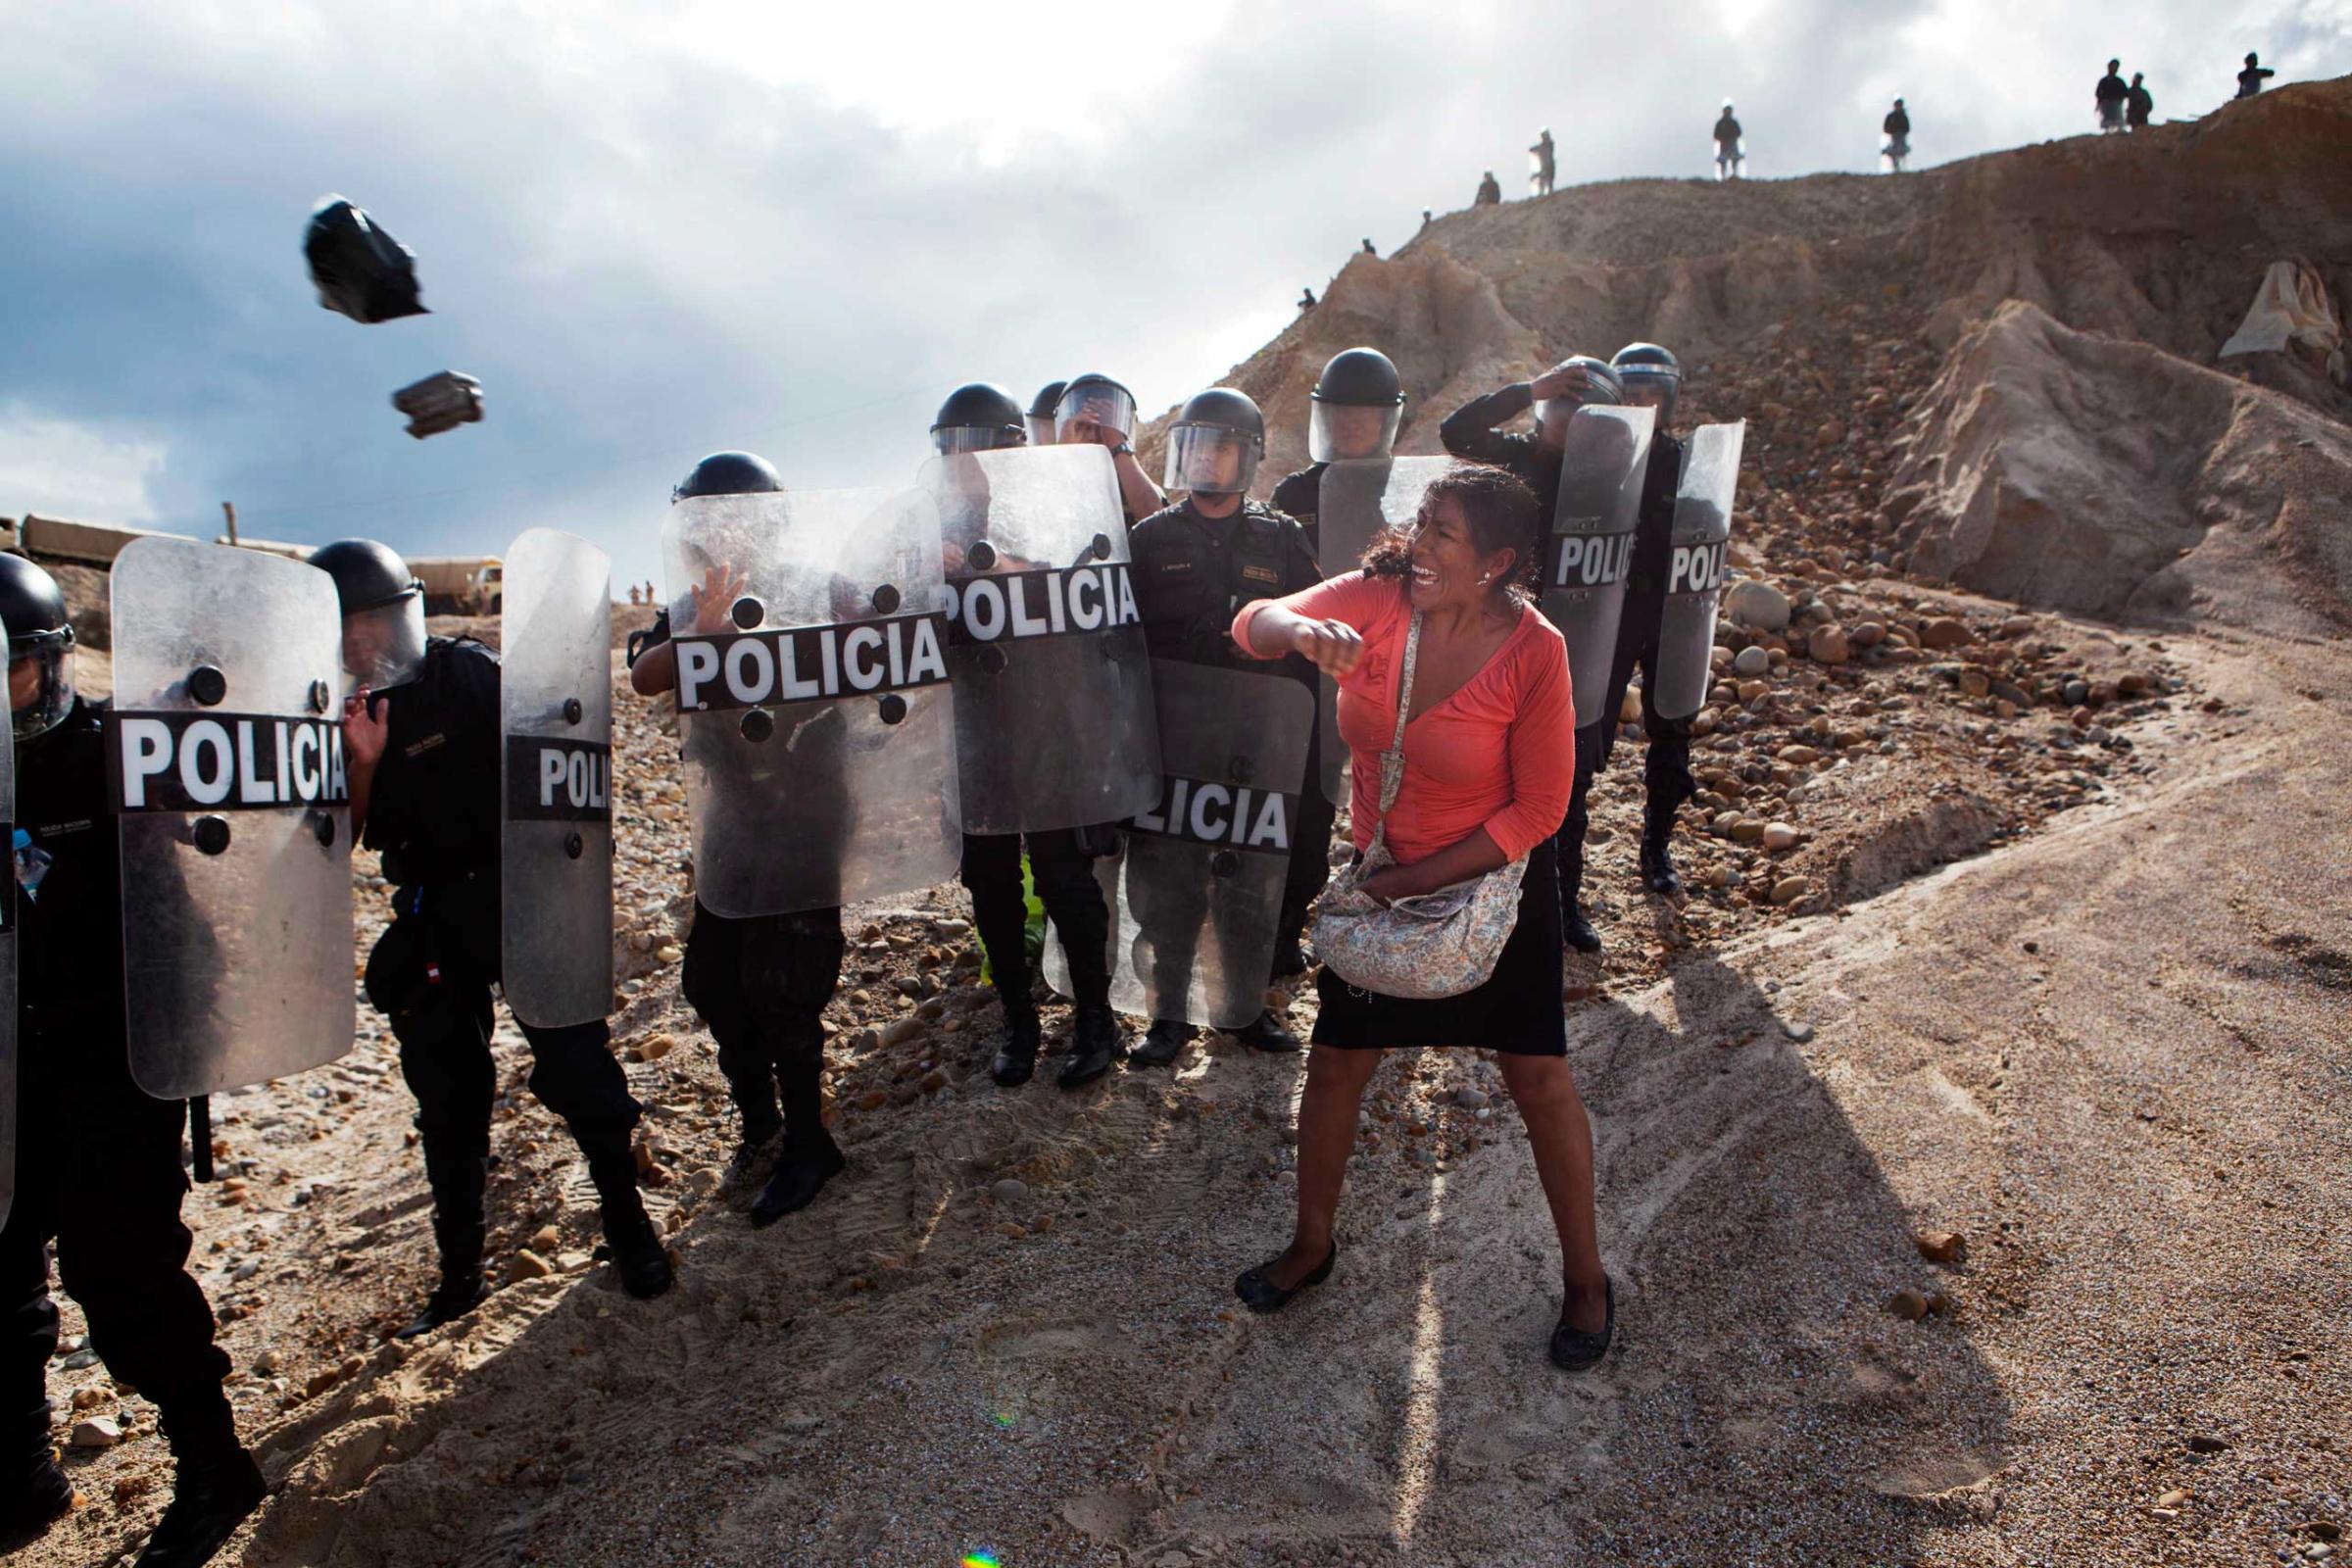 A woman throws a rock and a bag at police blocking her from getting home in the Huepetuhe district of the Madre de Dios region of Peru., April 28, 2014. Security forces began destroying illegal gold mining machinery in Peru’s southeastern jungle region of Madre de Dios, as authorities began enforcing a ban on illegal mining.